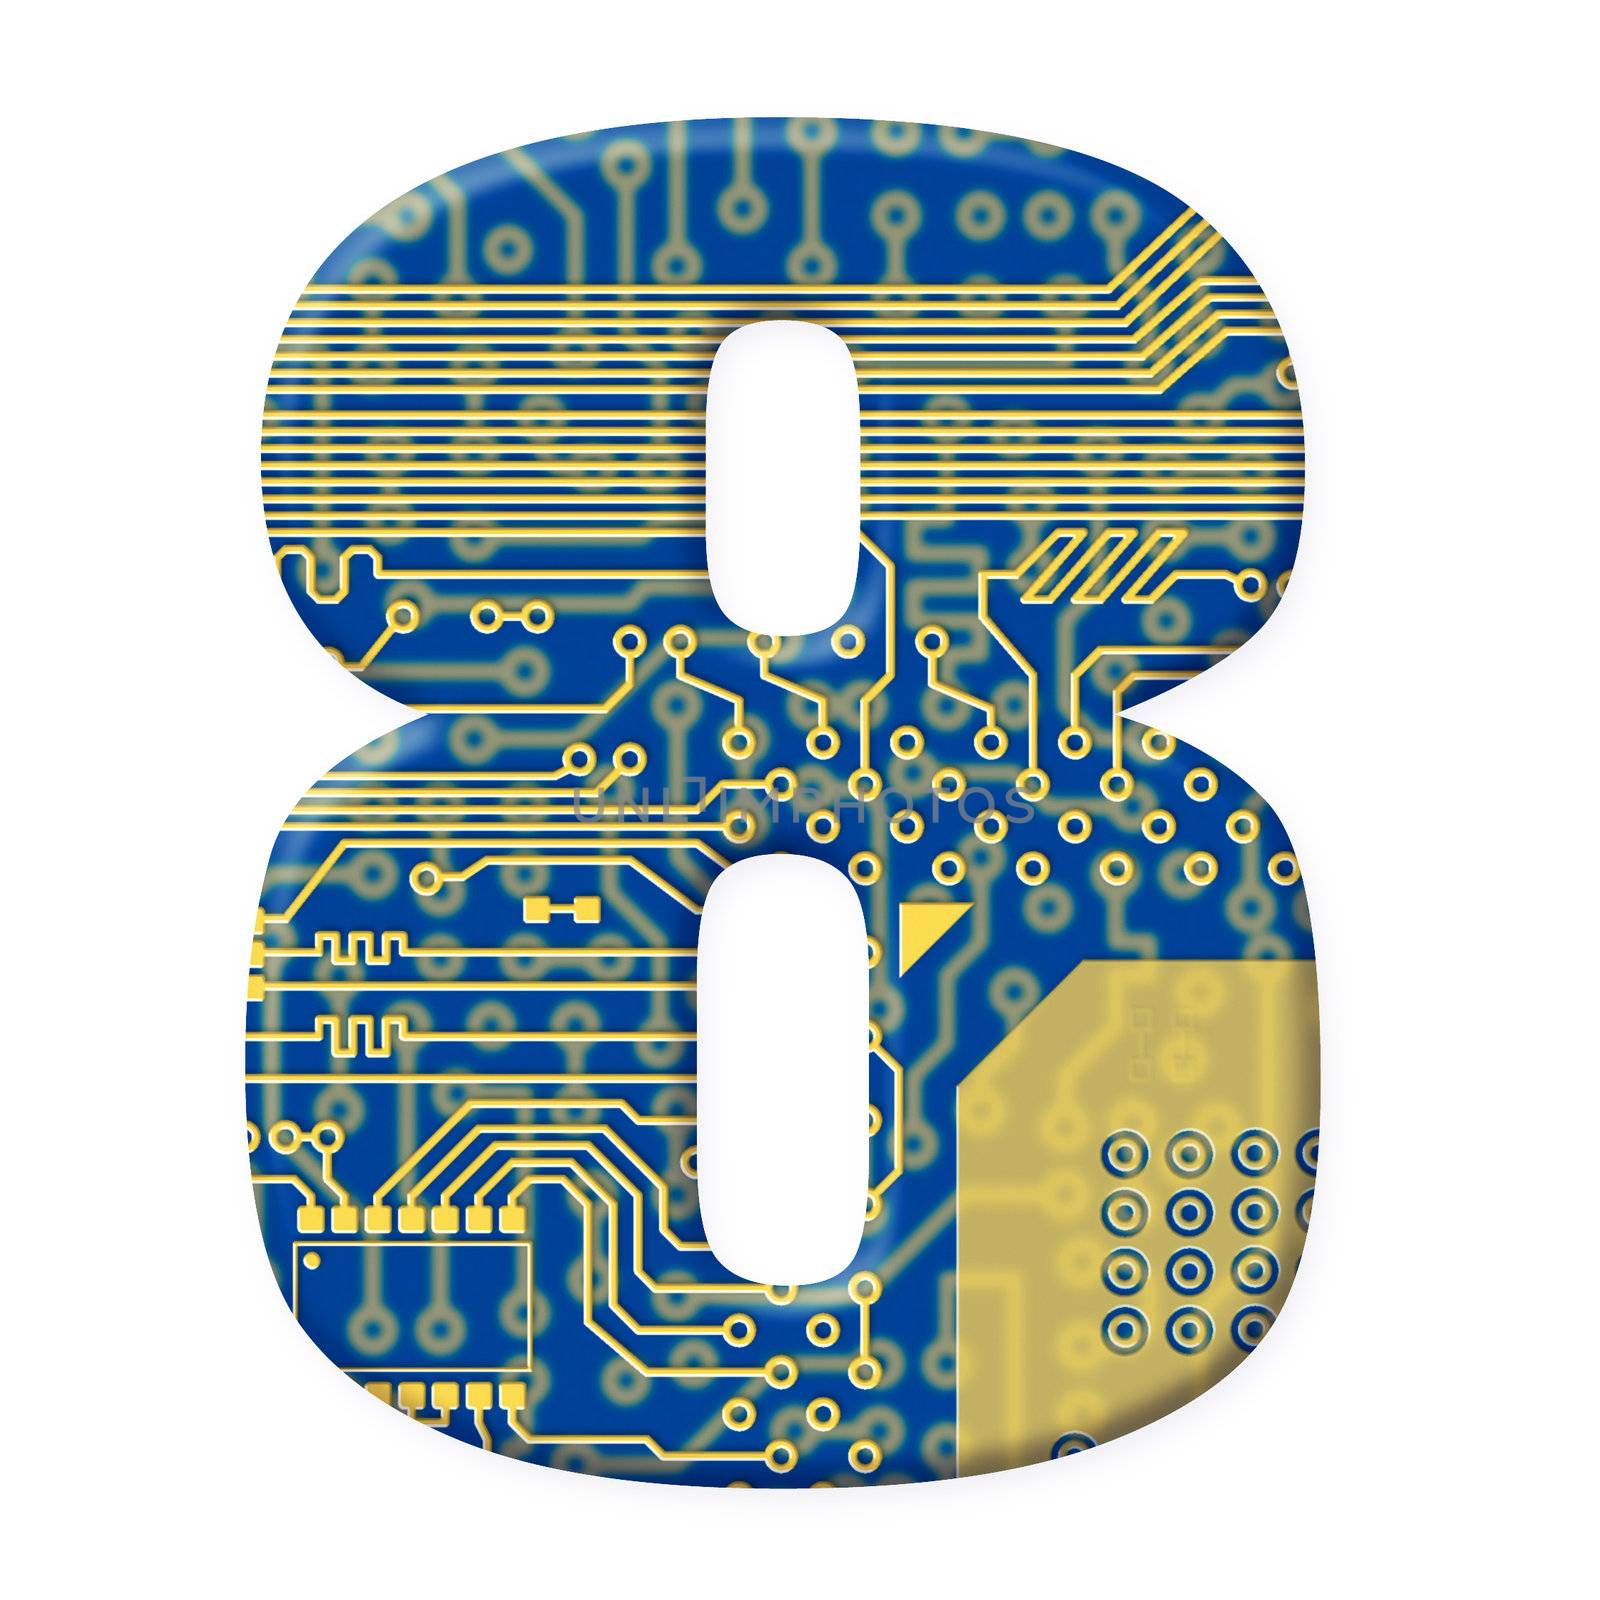 One digit from the electronic technology circuit board alphabet on a white background - 8